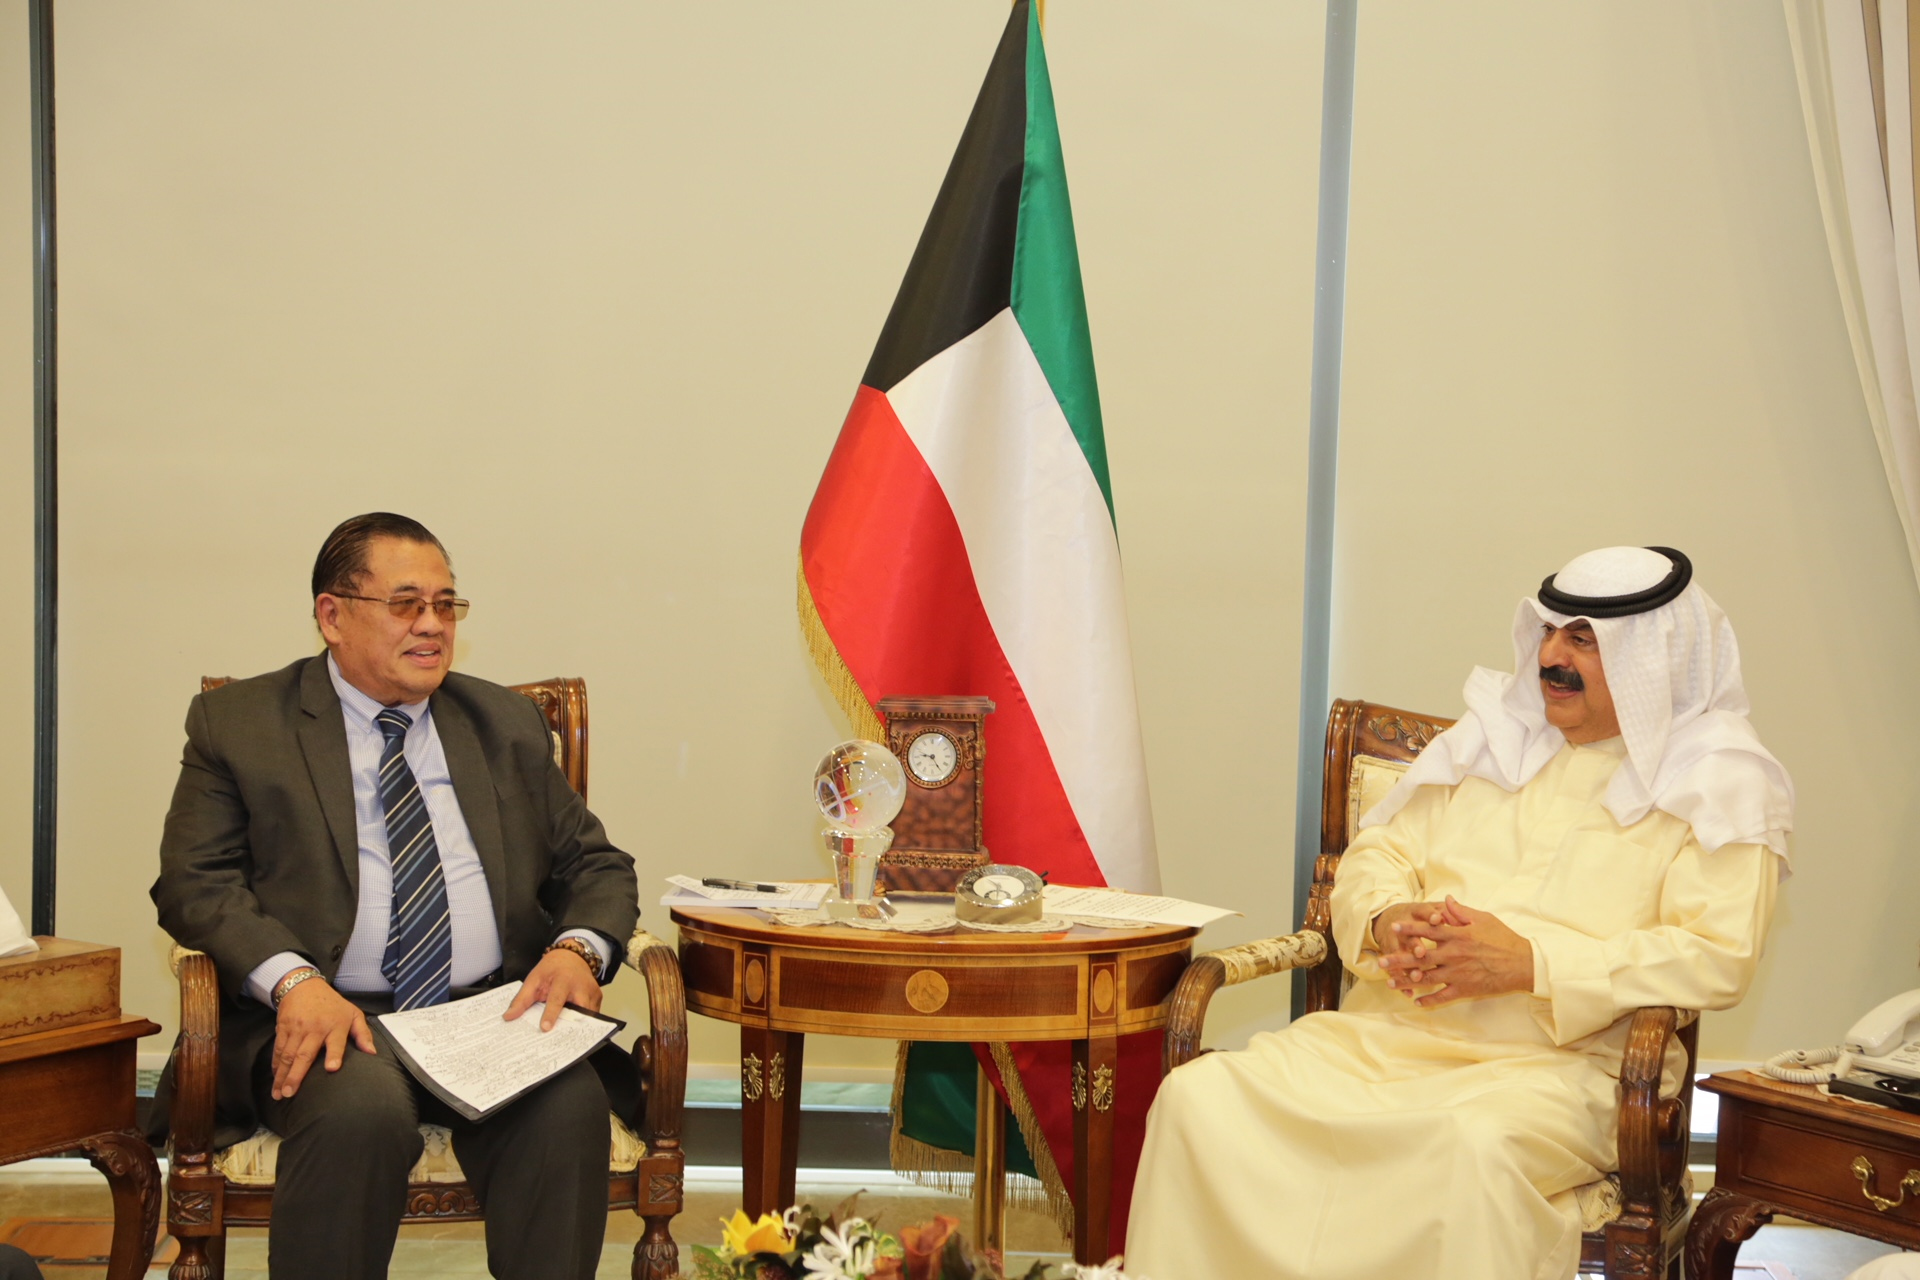 Deputy Foreign Minister Khaled Al-Jarallah meets with Presidential Adviser on Overseas Filipino Workers (OFWs) Abdullah Mamao